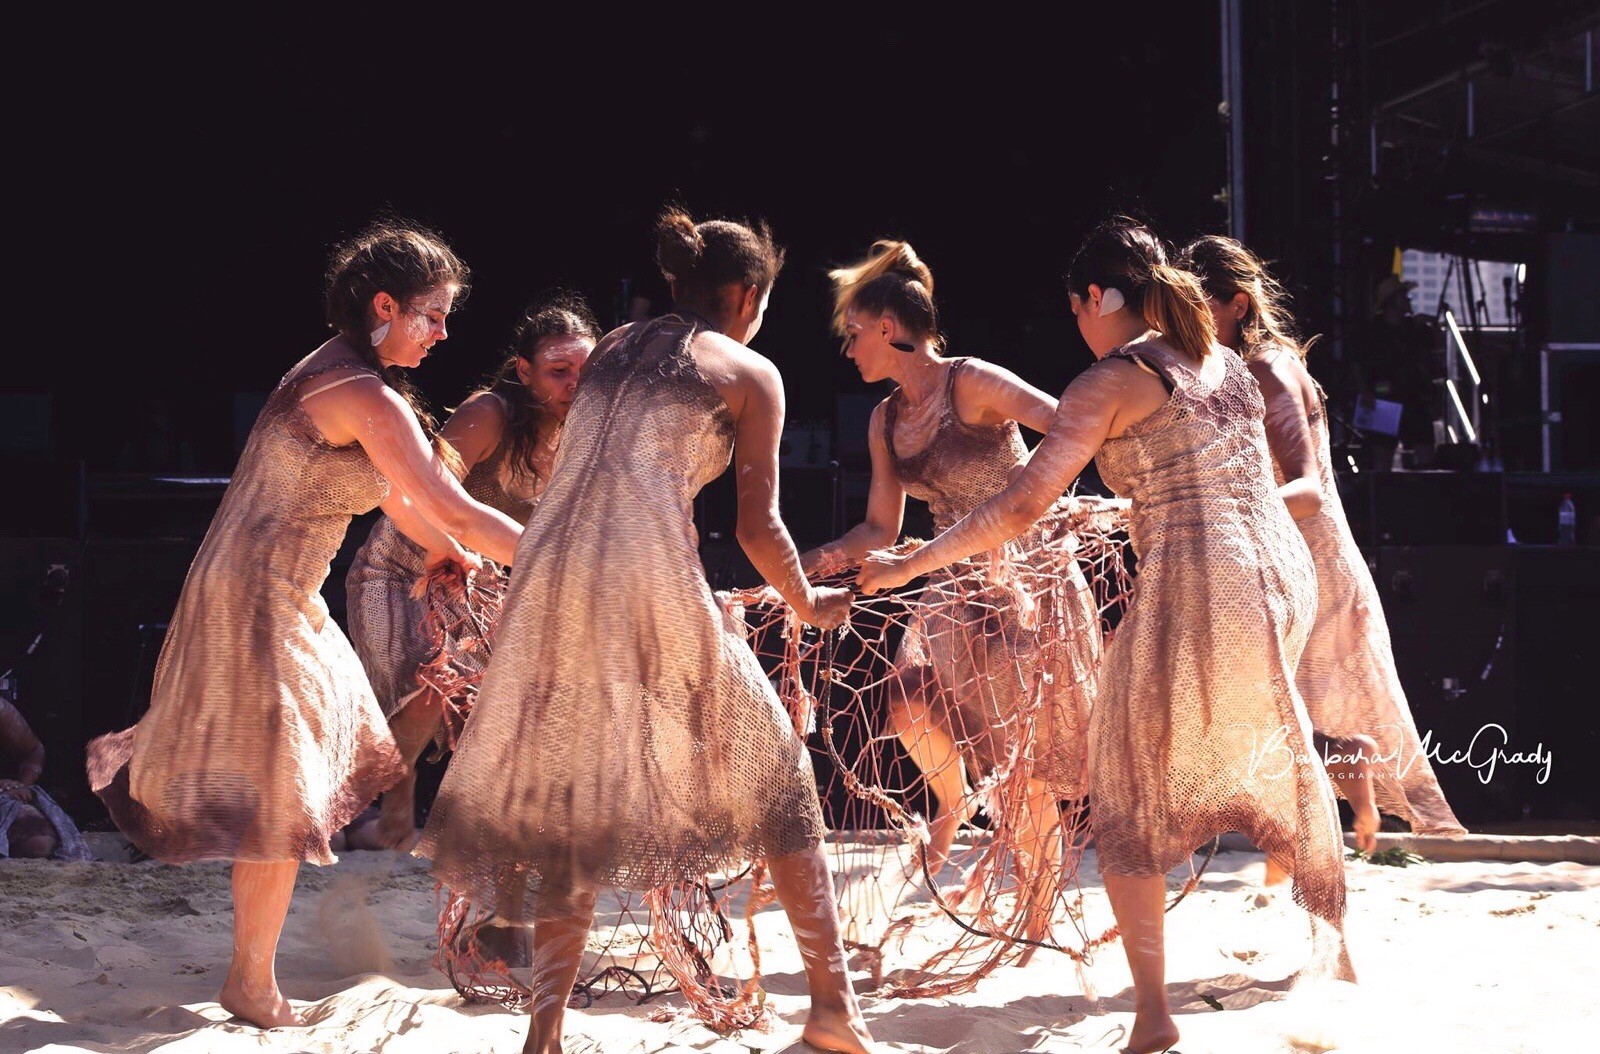 dancers in a circle with netting